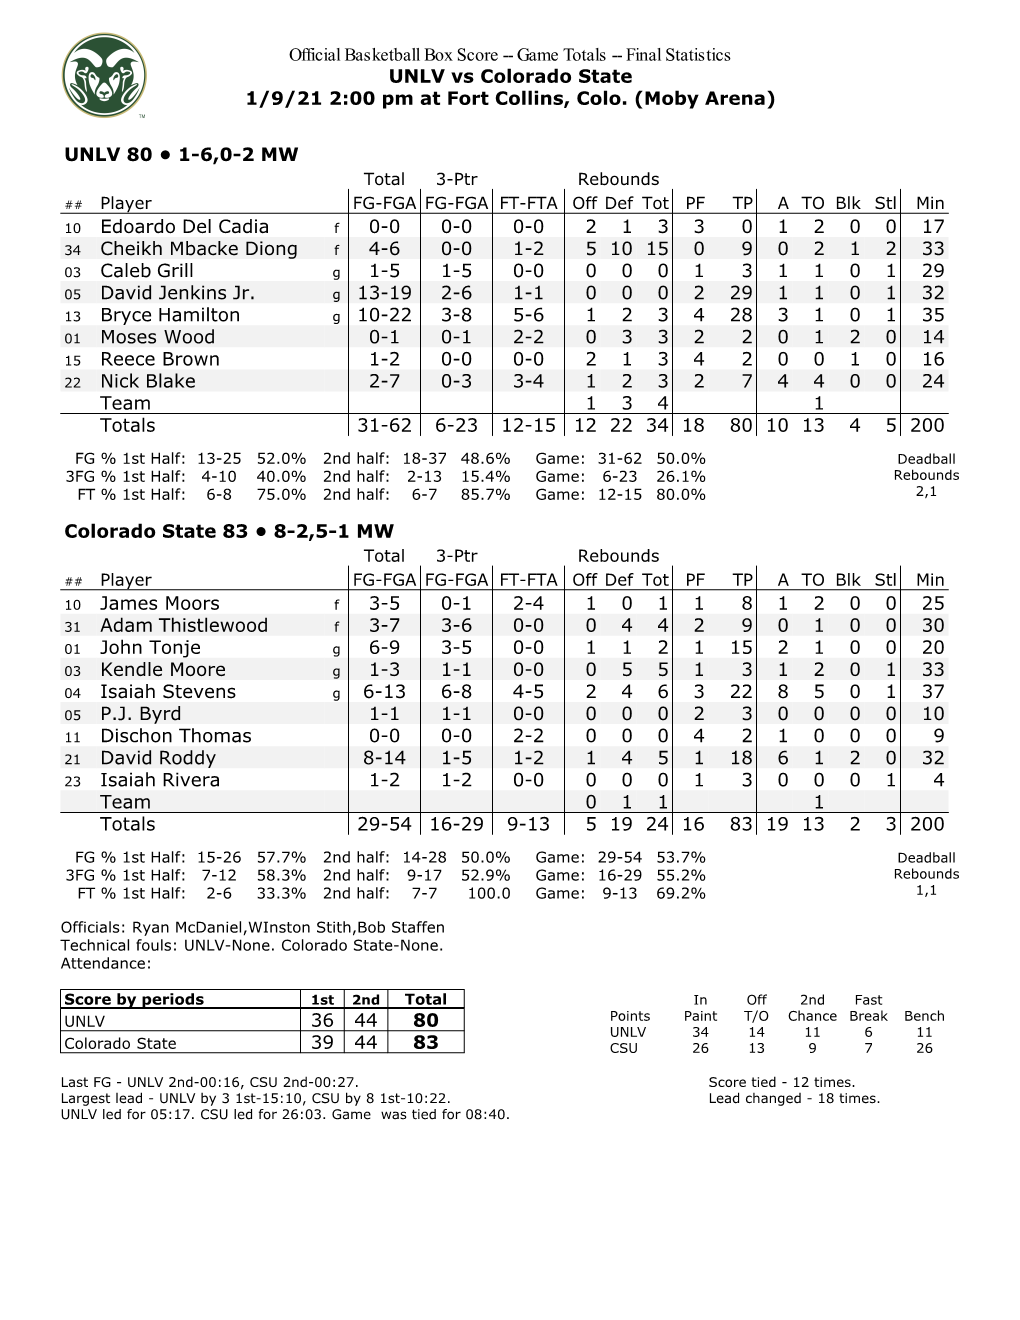 Official Basketball Box Score -- Game Totals -- Final Statistics UNLV Vs Colorado State 1/9/21 2:00 Pm at Fort Collins, Colo